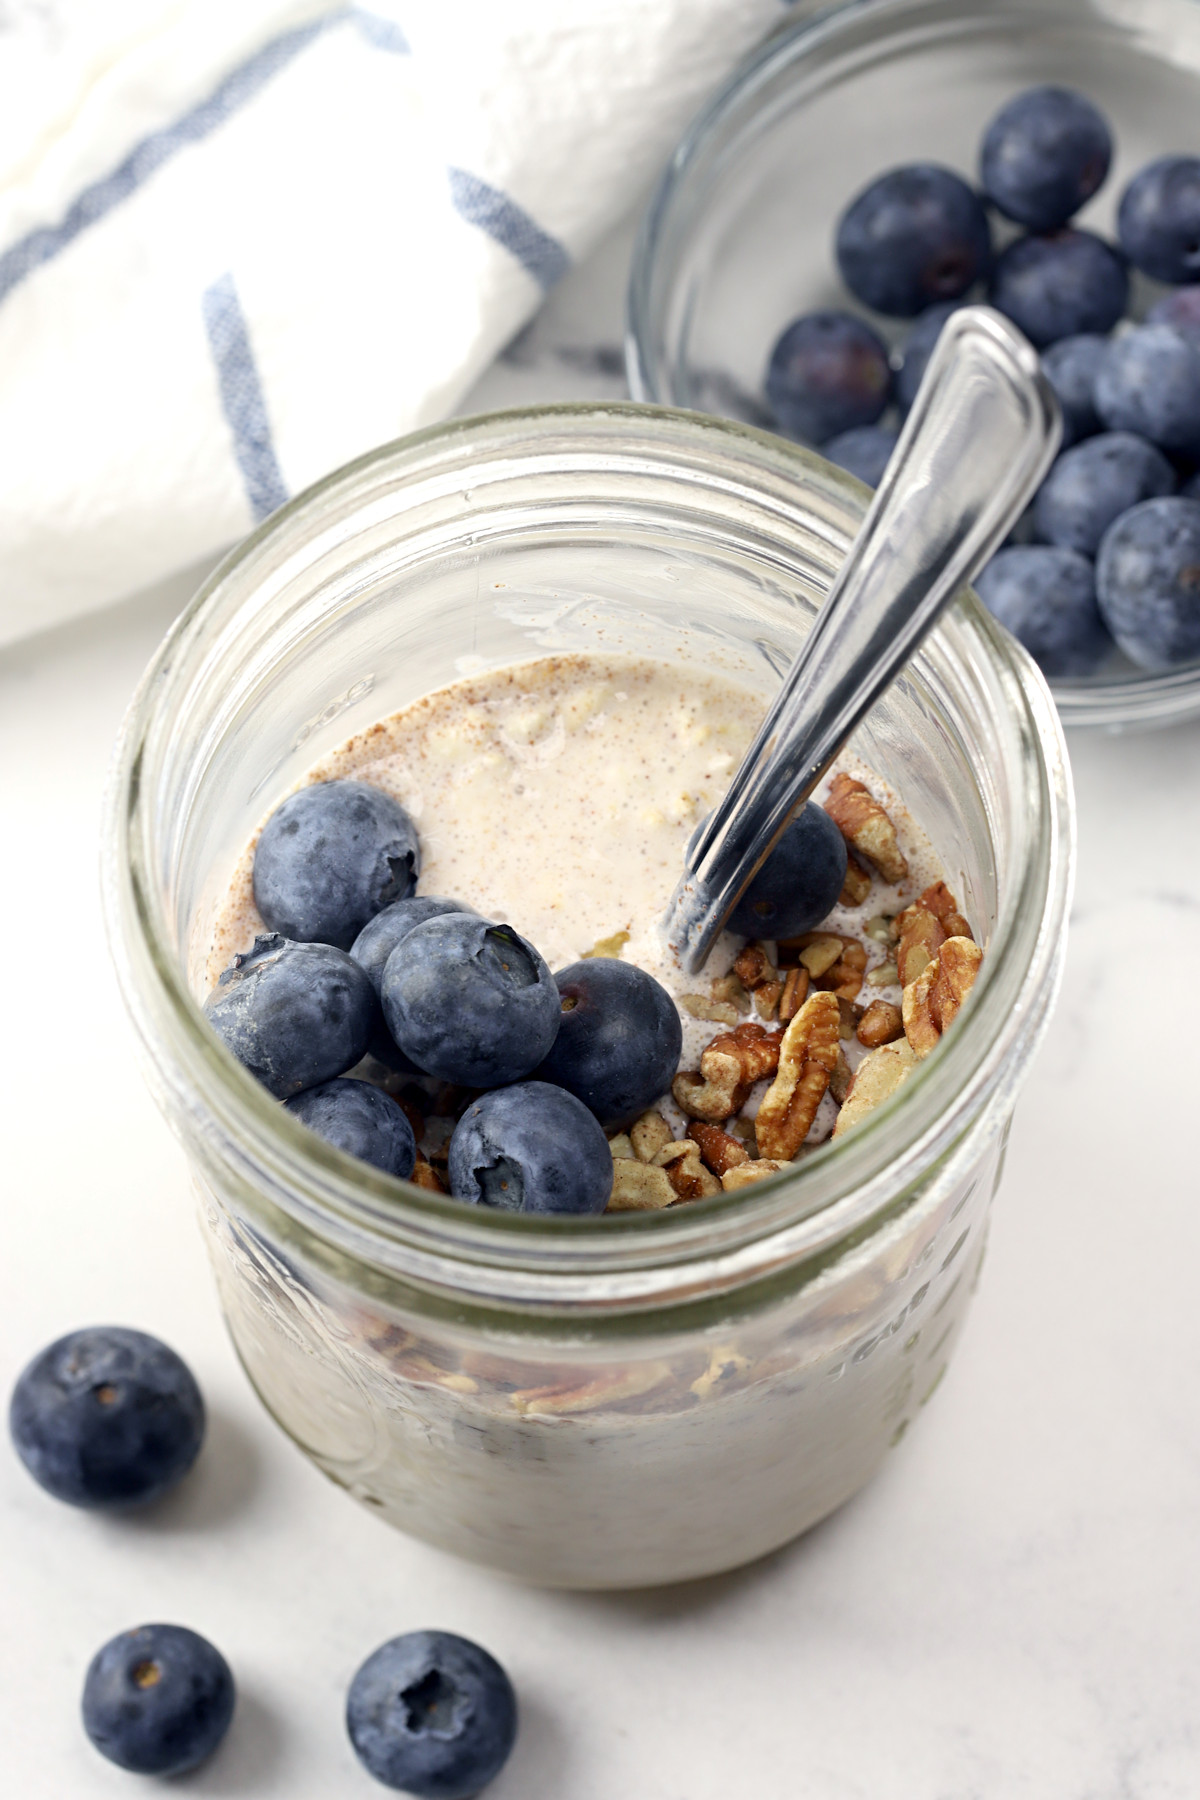 Overnight oats in a jar with blueberries and a spoon.